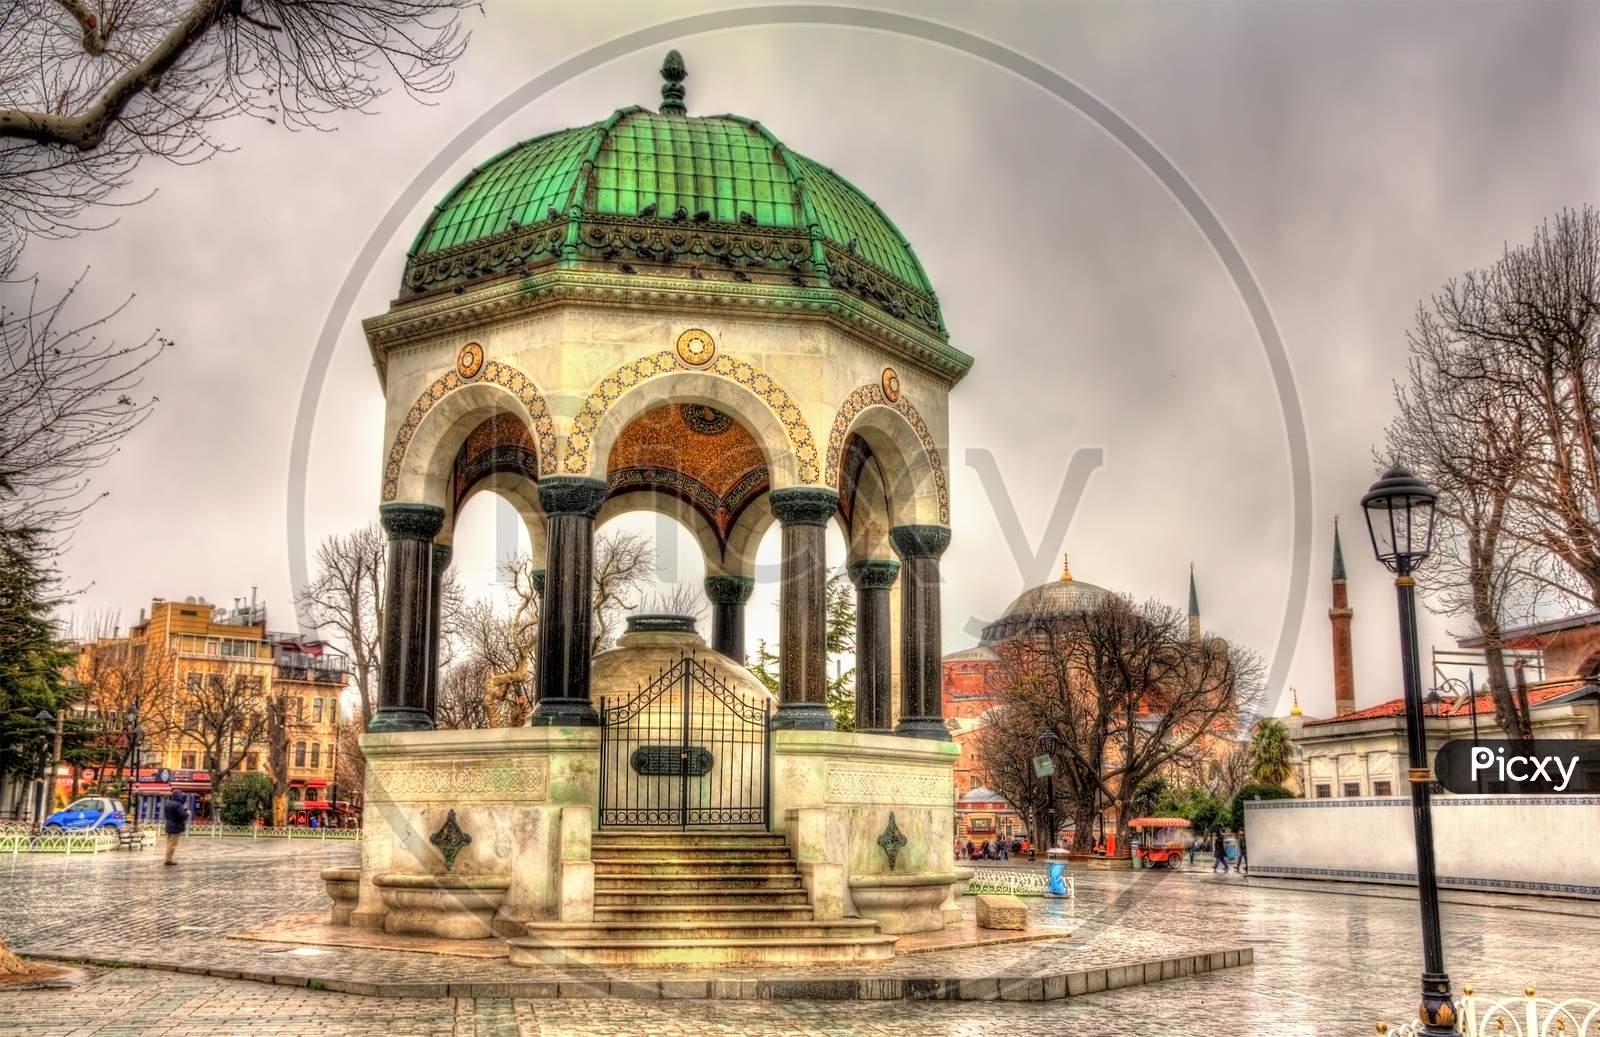 German Fountain On Sultanahmet Square In Istanbul - Turkey